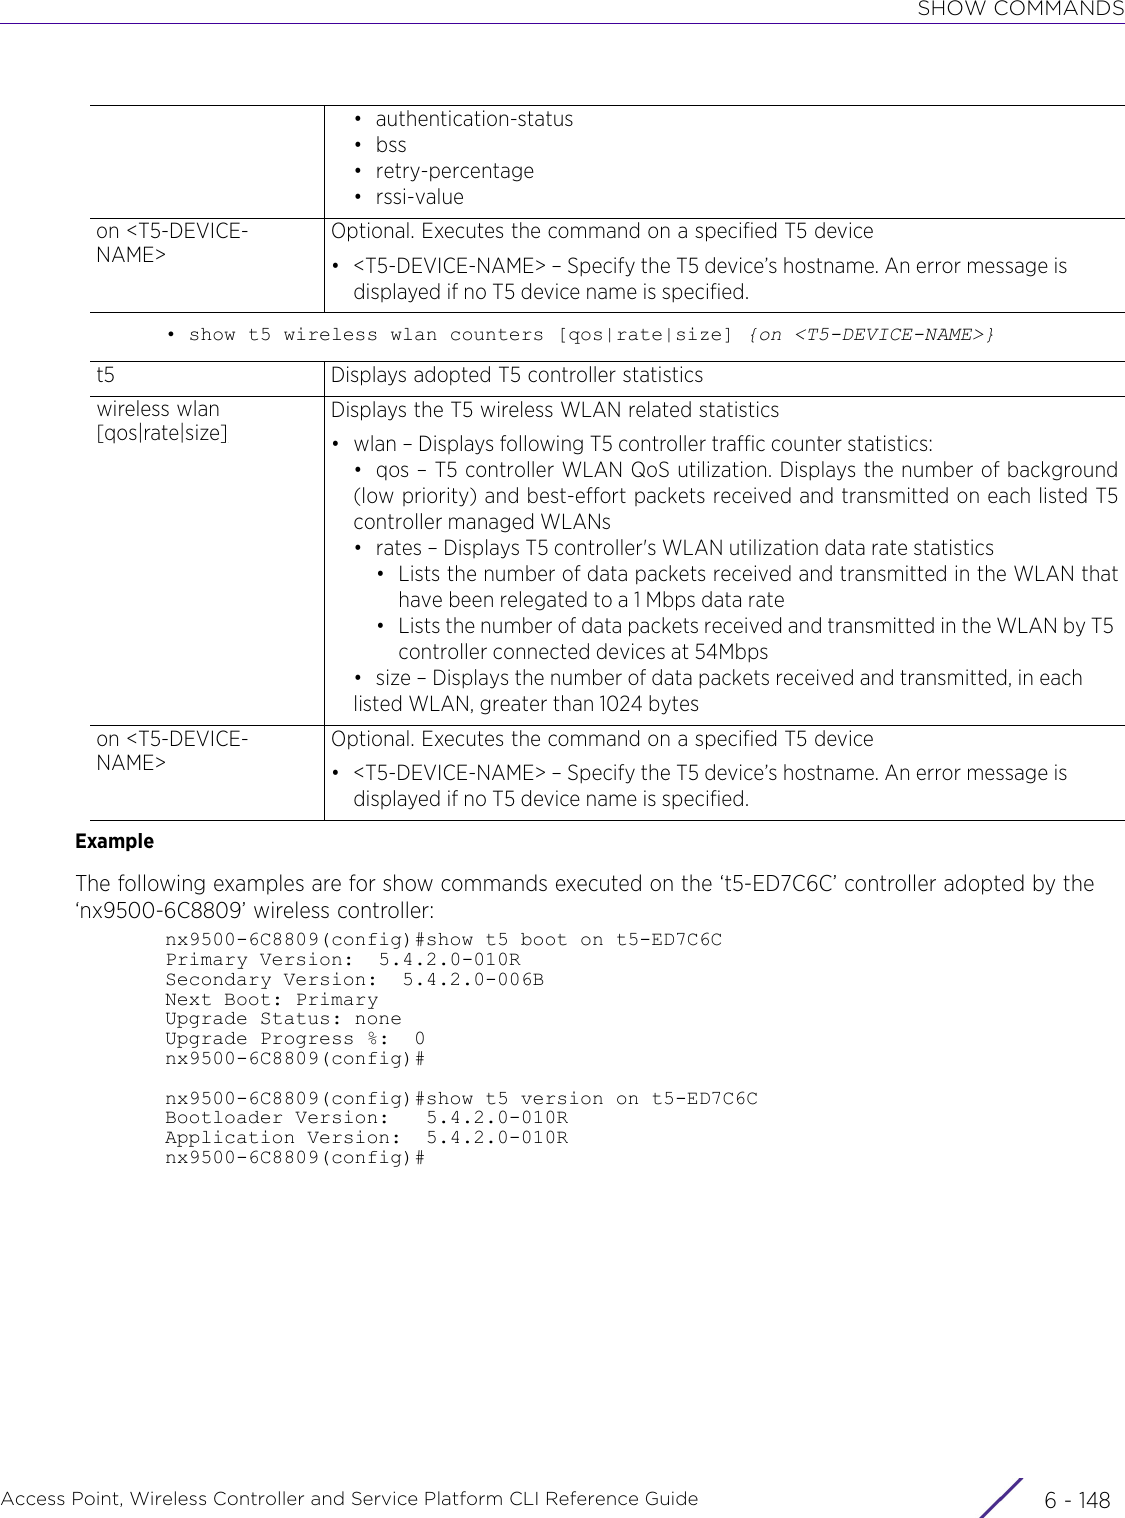 SHOW COMMANDSAccess Point, Wireless Controller and Service Platform CLI Reference Guide  6 - 148• show t5 wireless wlan counters [qos|rate|size] {on &lt;T5-DEVICE-NAME&gt;}ExampleThe following examples are for show commands executed on the ‘t5-ED7C6C’ controller adopted by the ‘nx9500-6C8809’ wireless controller:nx9500-6C8809(config)#show t5 boot on t5-ED7C6CPrimary Version:  5.4.2.0-010RSecondary Version:  5.4.2.0-006BNext Boot: PrimaryUpgrade Status: noneUpgrade Progress %:  0nx9500-6C8809(config)#nx9500-6C8809(config)#show t5 version on t5-ED7C6CBootloader Version:   5.4.2.0-010RApplication Version:  5.4.2.0-010Rnx9500-6C8809(config)#• authentication-status•bss• retry-percentage• rssi-valueon &lt;T5-DEVICE-NAME&gt;Optional. Executes the command on a specified T5 device• &lt;T5-DEVICE-NAME&gt; – Specify the T5 device’s hostname. An error message is displayed if no T5 device name is specified.t5 Displays adopted T5 controller statisticswireless wlan [qos|rate|size]Displays the T5 wireless WLAN related statistics• wlan – Displays following T5 controller traffic counter statistics:• qos – T5 controller WLAN QoS utilization. Displays the number of background(low priority) and best-effort packets received and transmitted on each listed T5controller managed WLANs• rates – Displays T5 controller&apos;s WLAN utilization data rate statistics• Lists the number of data packets received and transmitted in the WLAN thathave been relegated to a 1 Mbps data rate• Lists the number of data packets received and transmitted in the WLAN by T5 controller connected devices at 54Mbps• size – Displays the number of data packets received and transmitted, in each listed WLAN, greater than 1024 byteson &lt;T5-DEVICE-NAME&gt;Optional. Executes the command on a specified T5 device• &lt;T5-DEVICE-NAME&gt; – Specify the T5 device’s hostname. An error message is displayed if no T5 device name is specified.